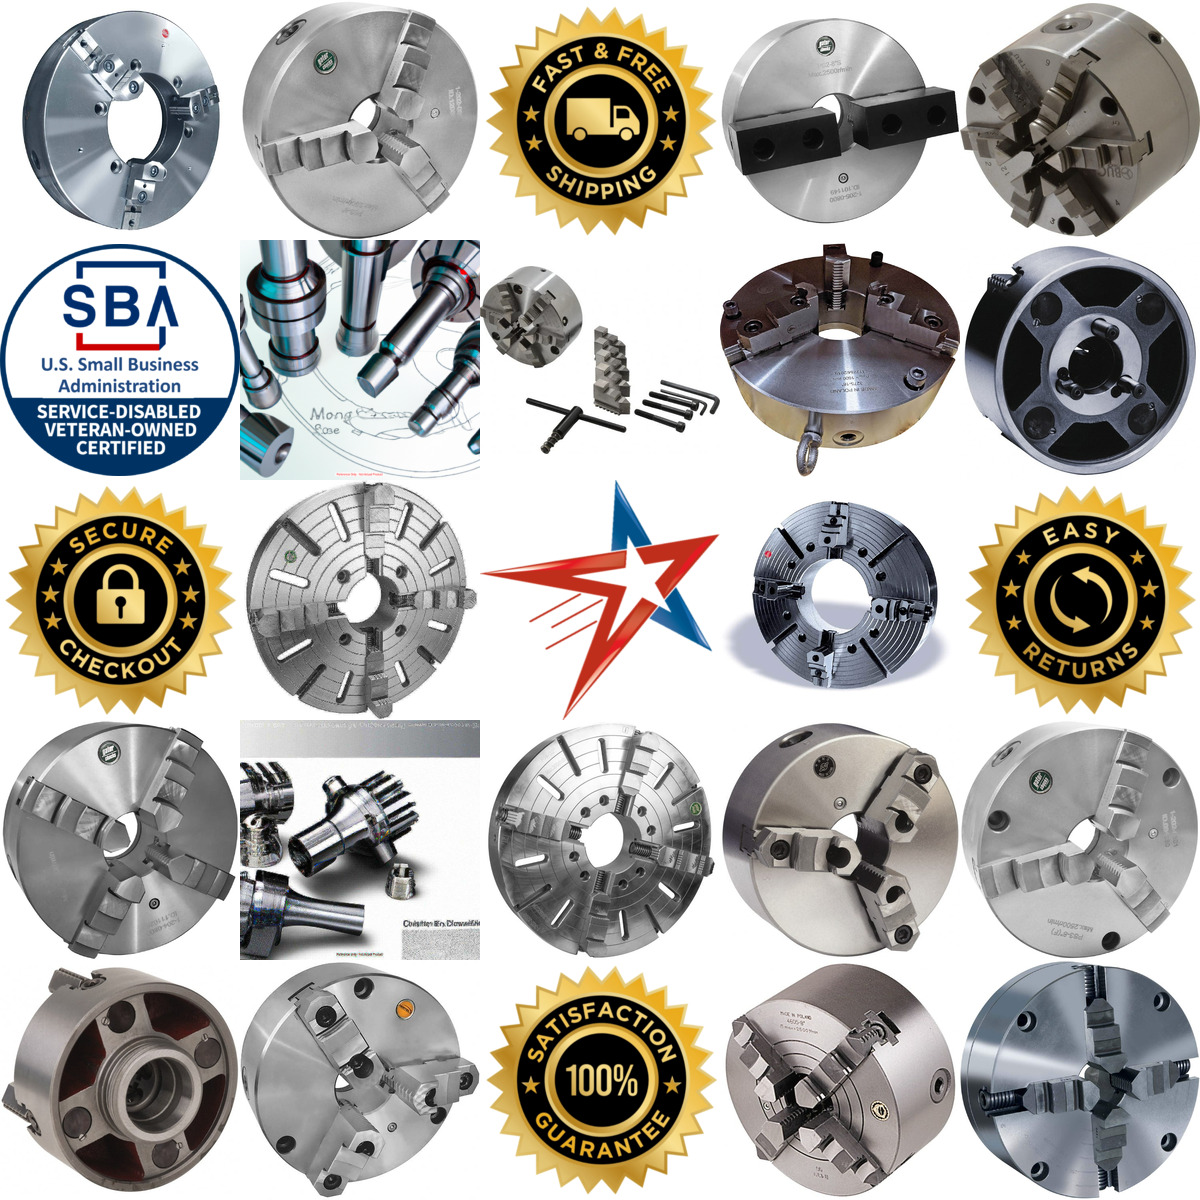 A selection of Manual Lathe Chucks products on GoVets